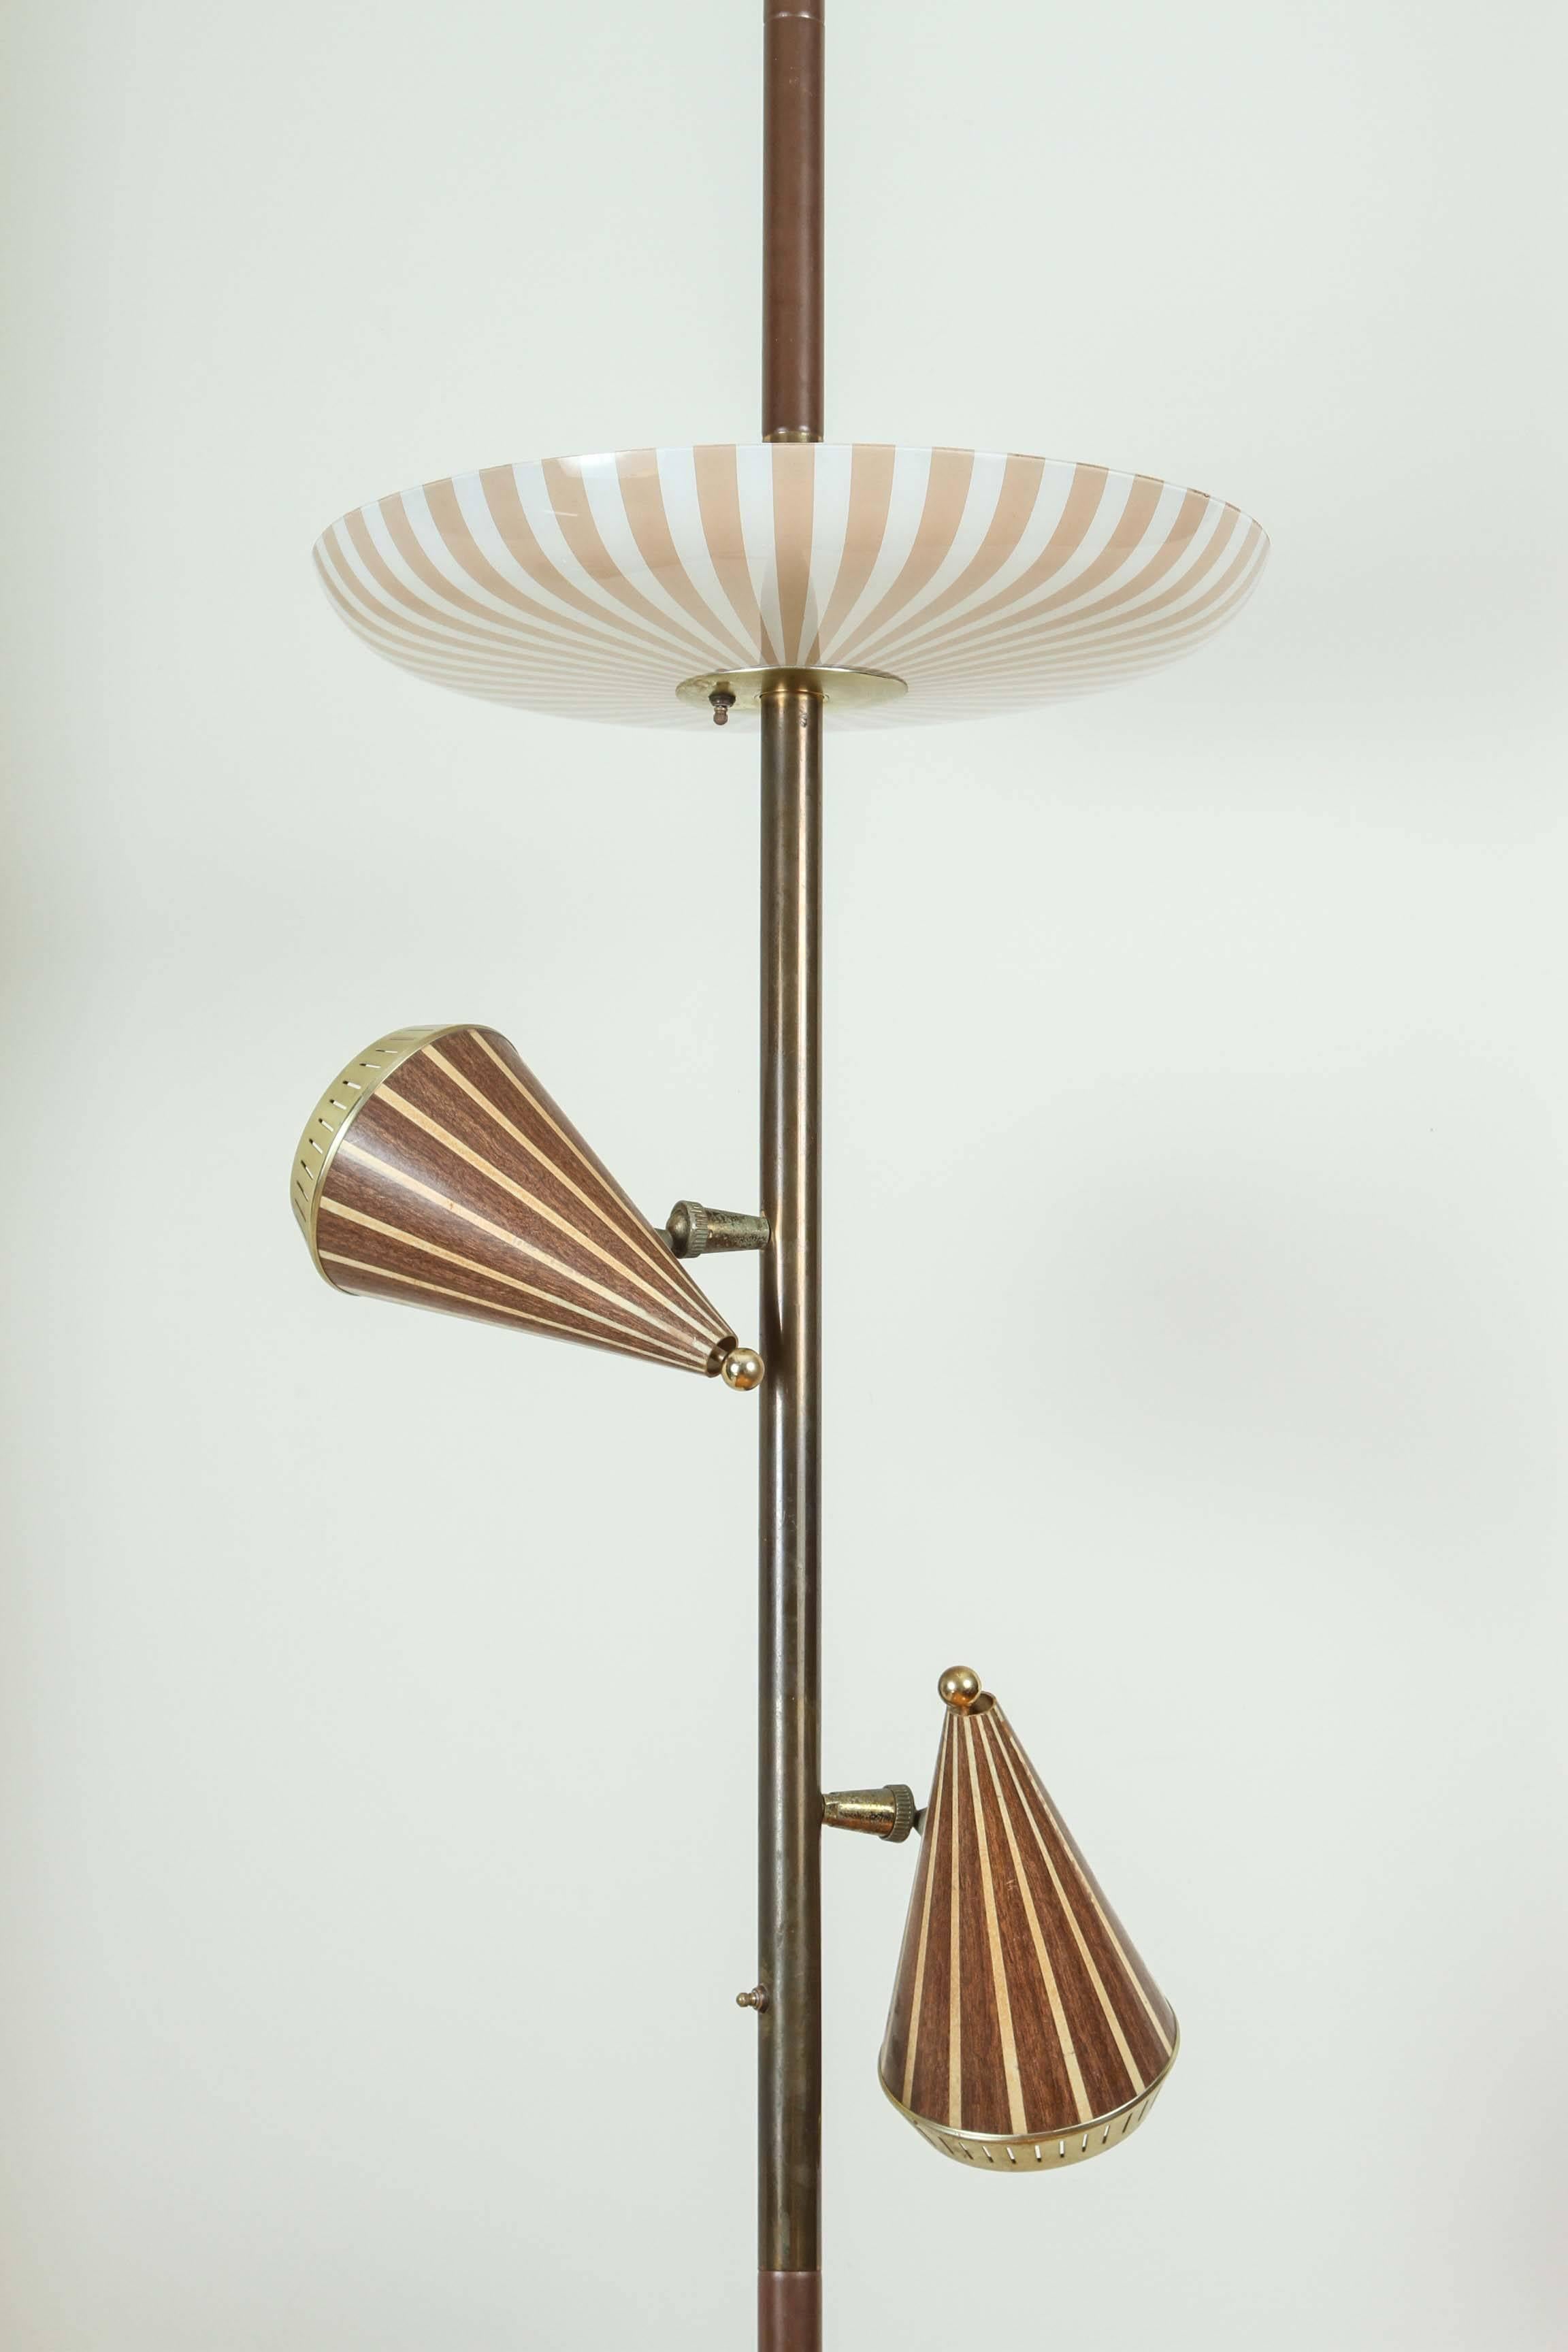 Vintage Mid-Century lamp from the 1950s consists of a large glass plate on top with three lights and two dark inlayed wood patterned sconces that can rotate 360 degrees or angle in or out attached to a metal brass brown tension pole. 
With a single